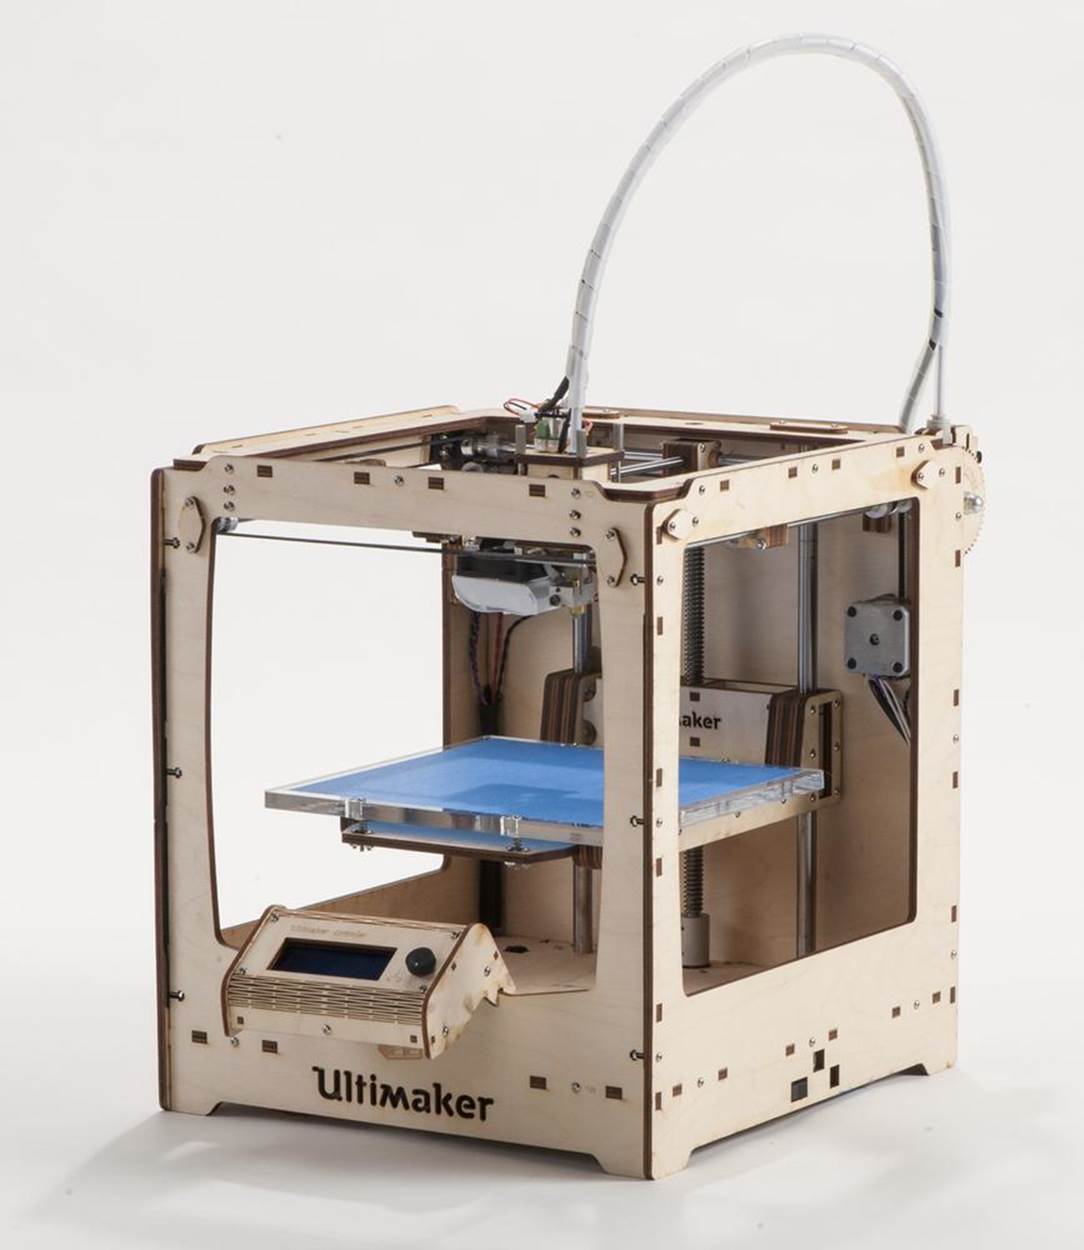 The Ultimaker